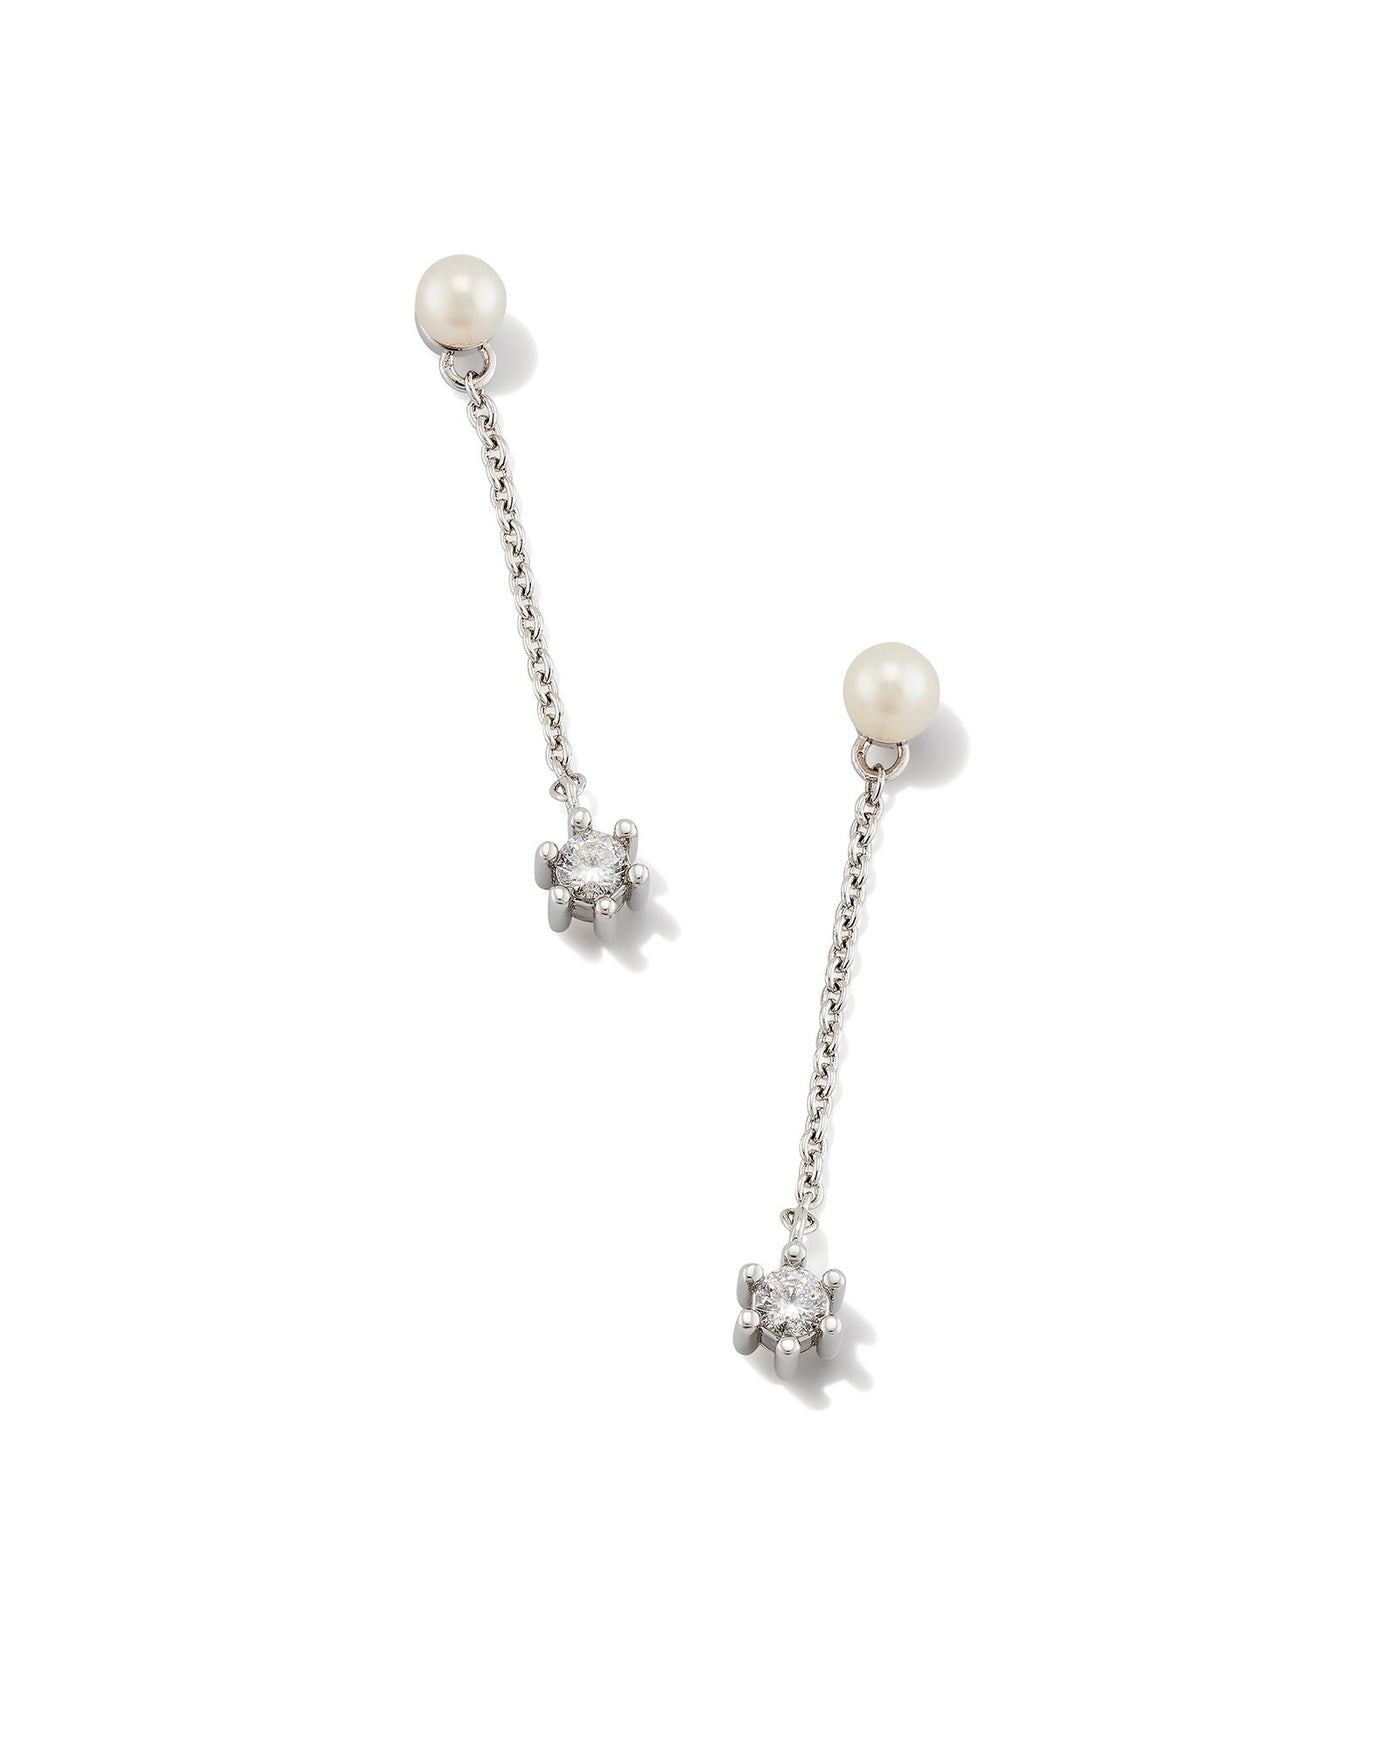 Kendra Scott Leighton Pearl Linear Earrings Silver White Pearl-Earrings-Kendra Scott-Market Street Nest, Fashionable Clothing, Shoes and Home Décor Located in Mabank, TX